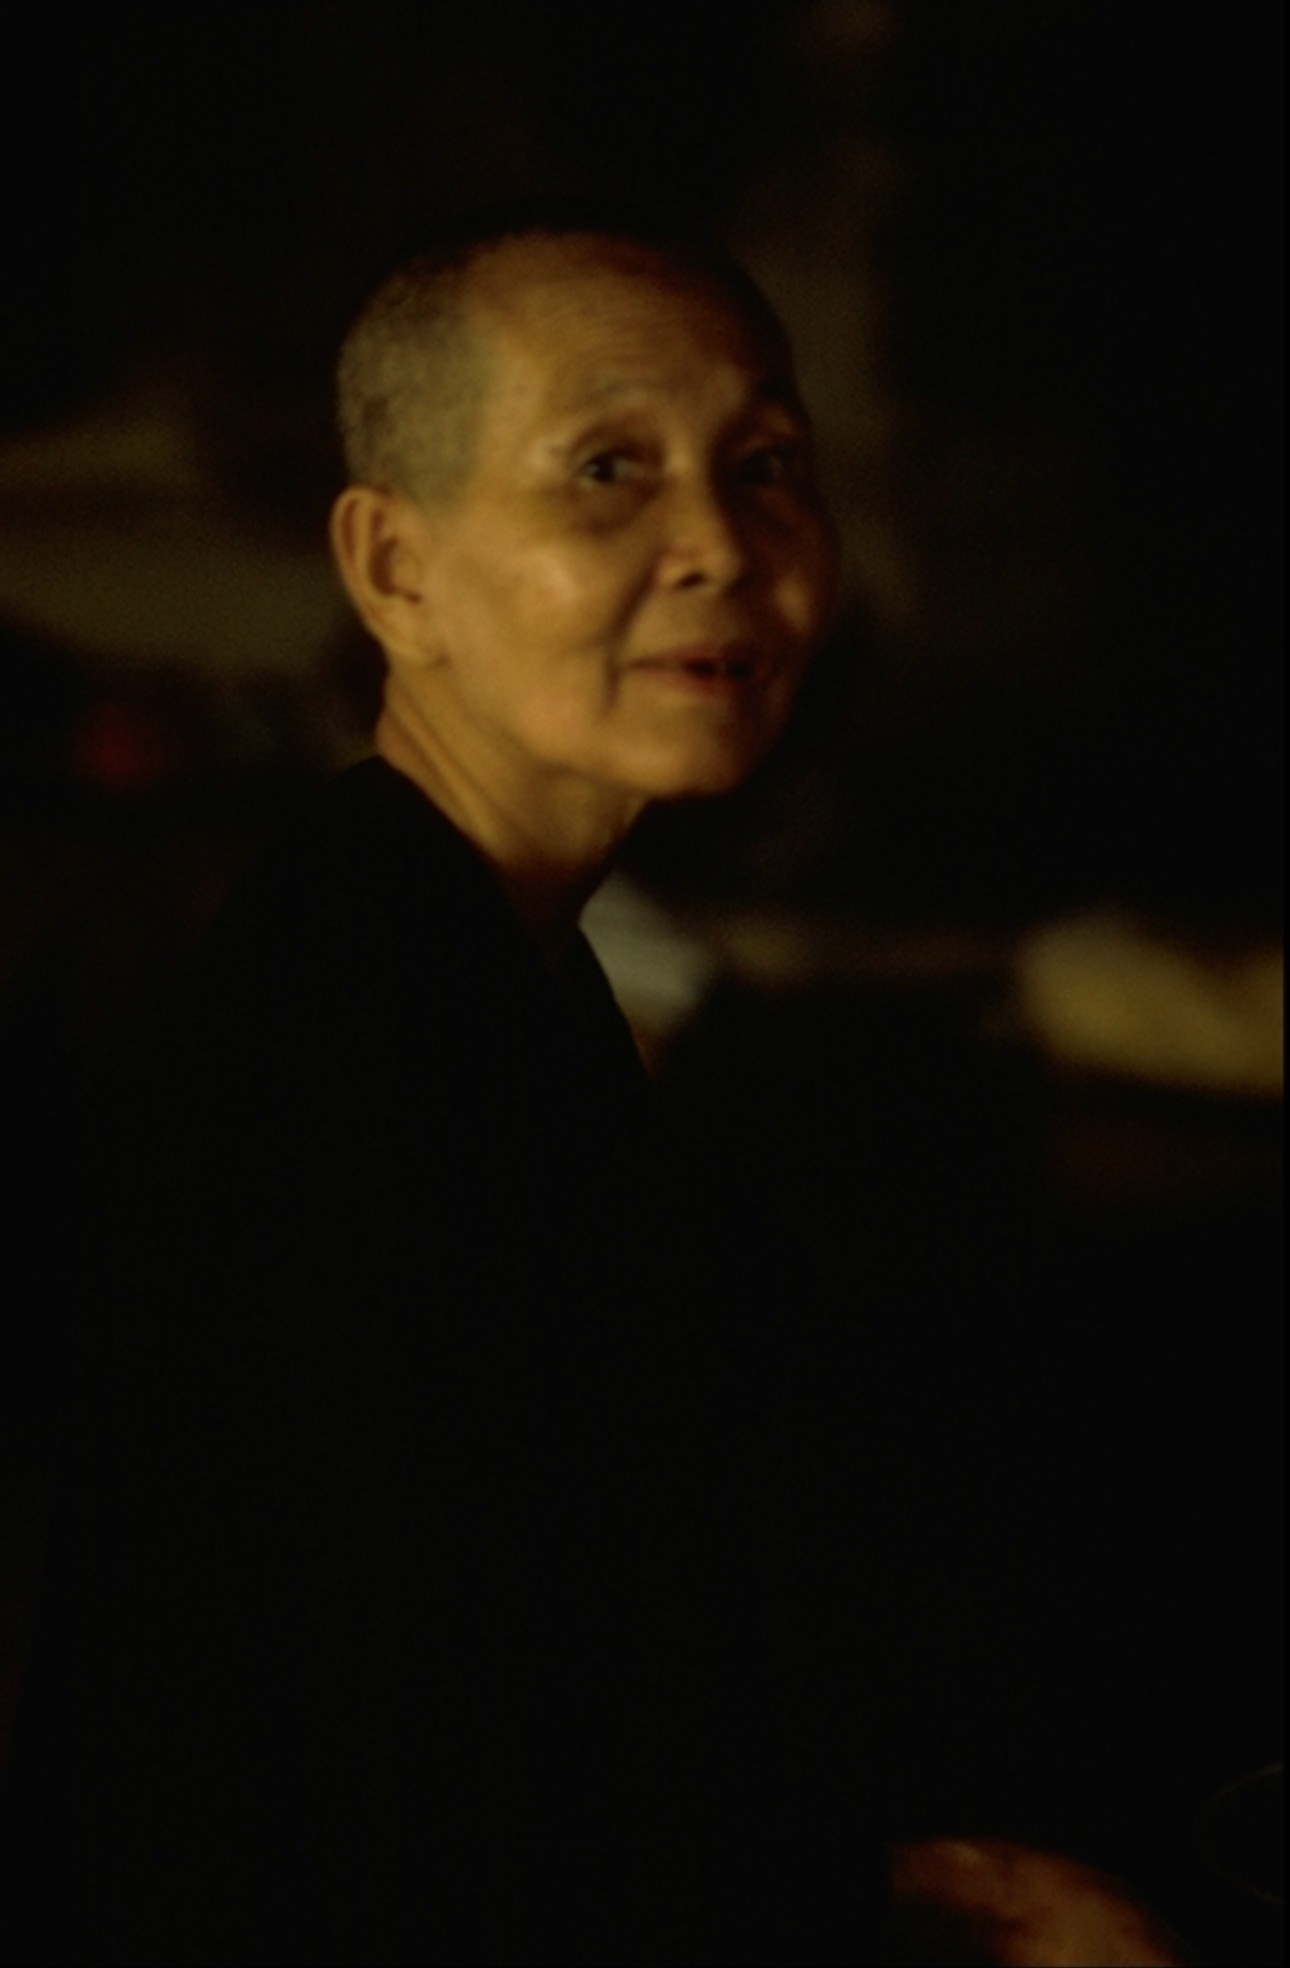 Vietnamese old person 1971